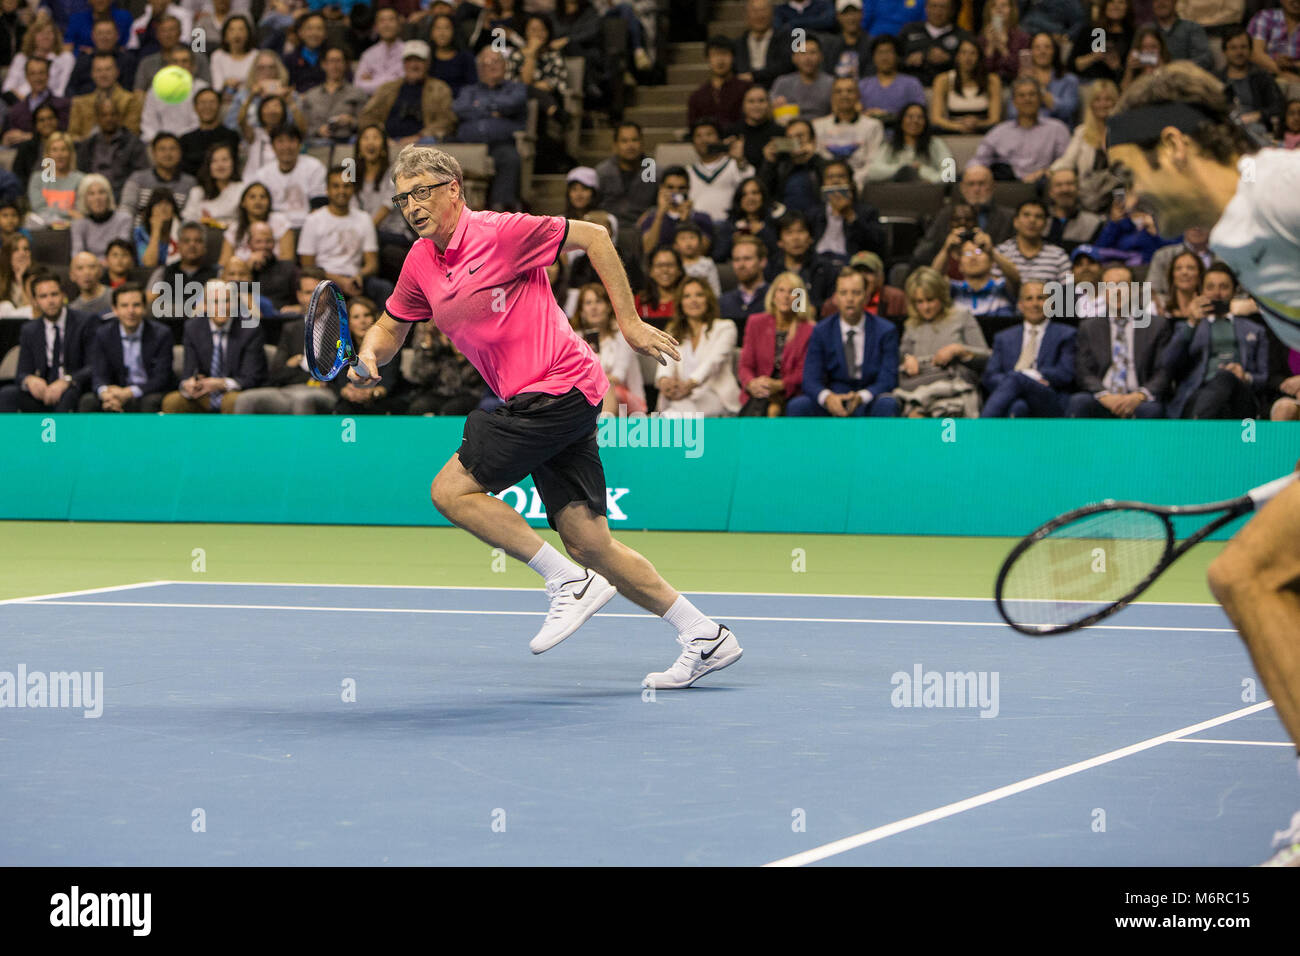 San Jose, California, USA. 05th Mar, 2018. Bill Gates runs down a ball during his doubles set with Roger Federer (SUI) against Jack Sock (USA) and Savannah Guthrie at The Match for Africa 5 Silicon Valley played at the SAP Center in San Jose, California. © Mal Taam/TennisClix/CSM/Alamy Live News Stock Photo